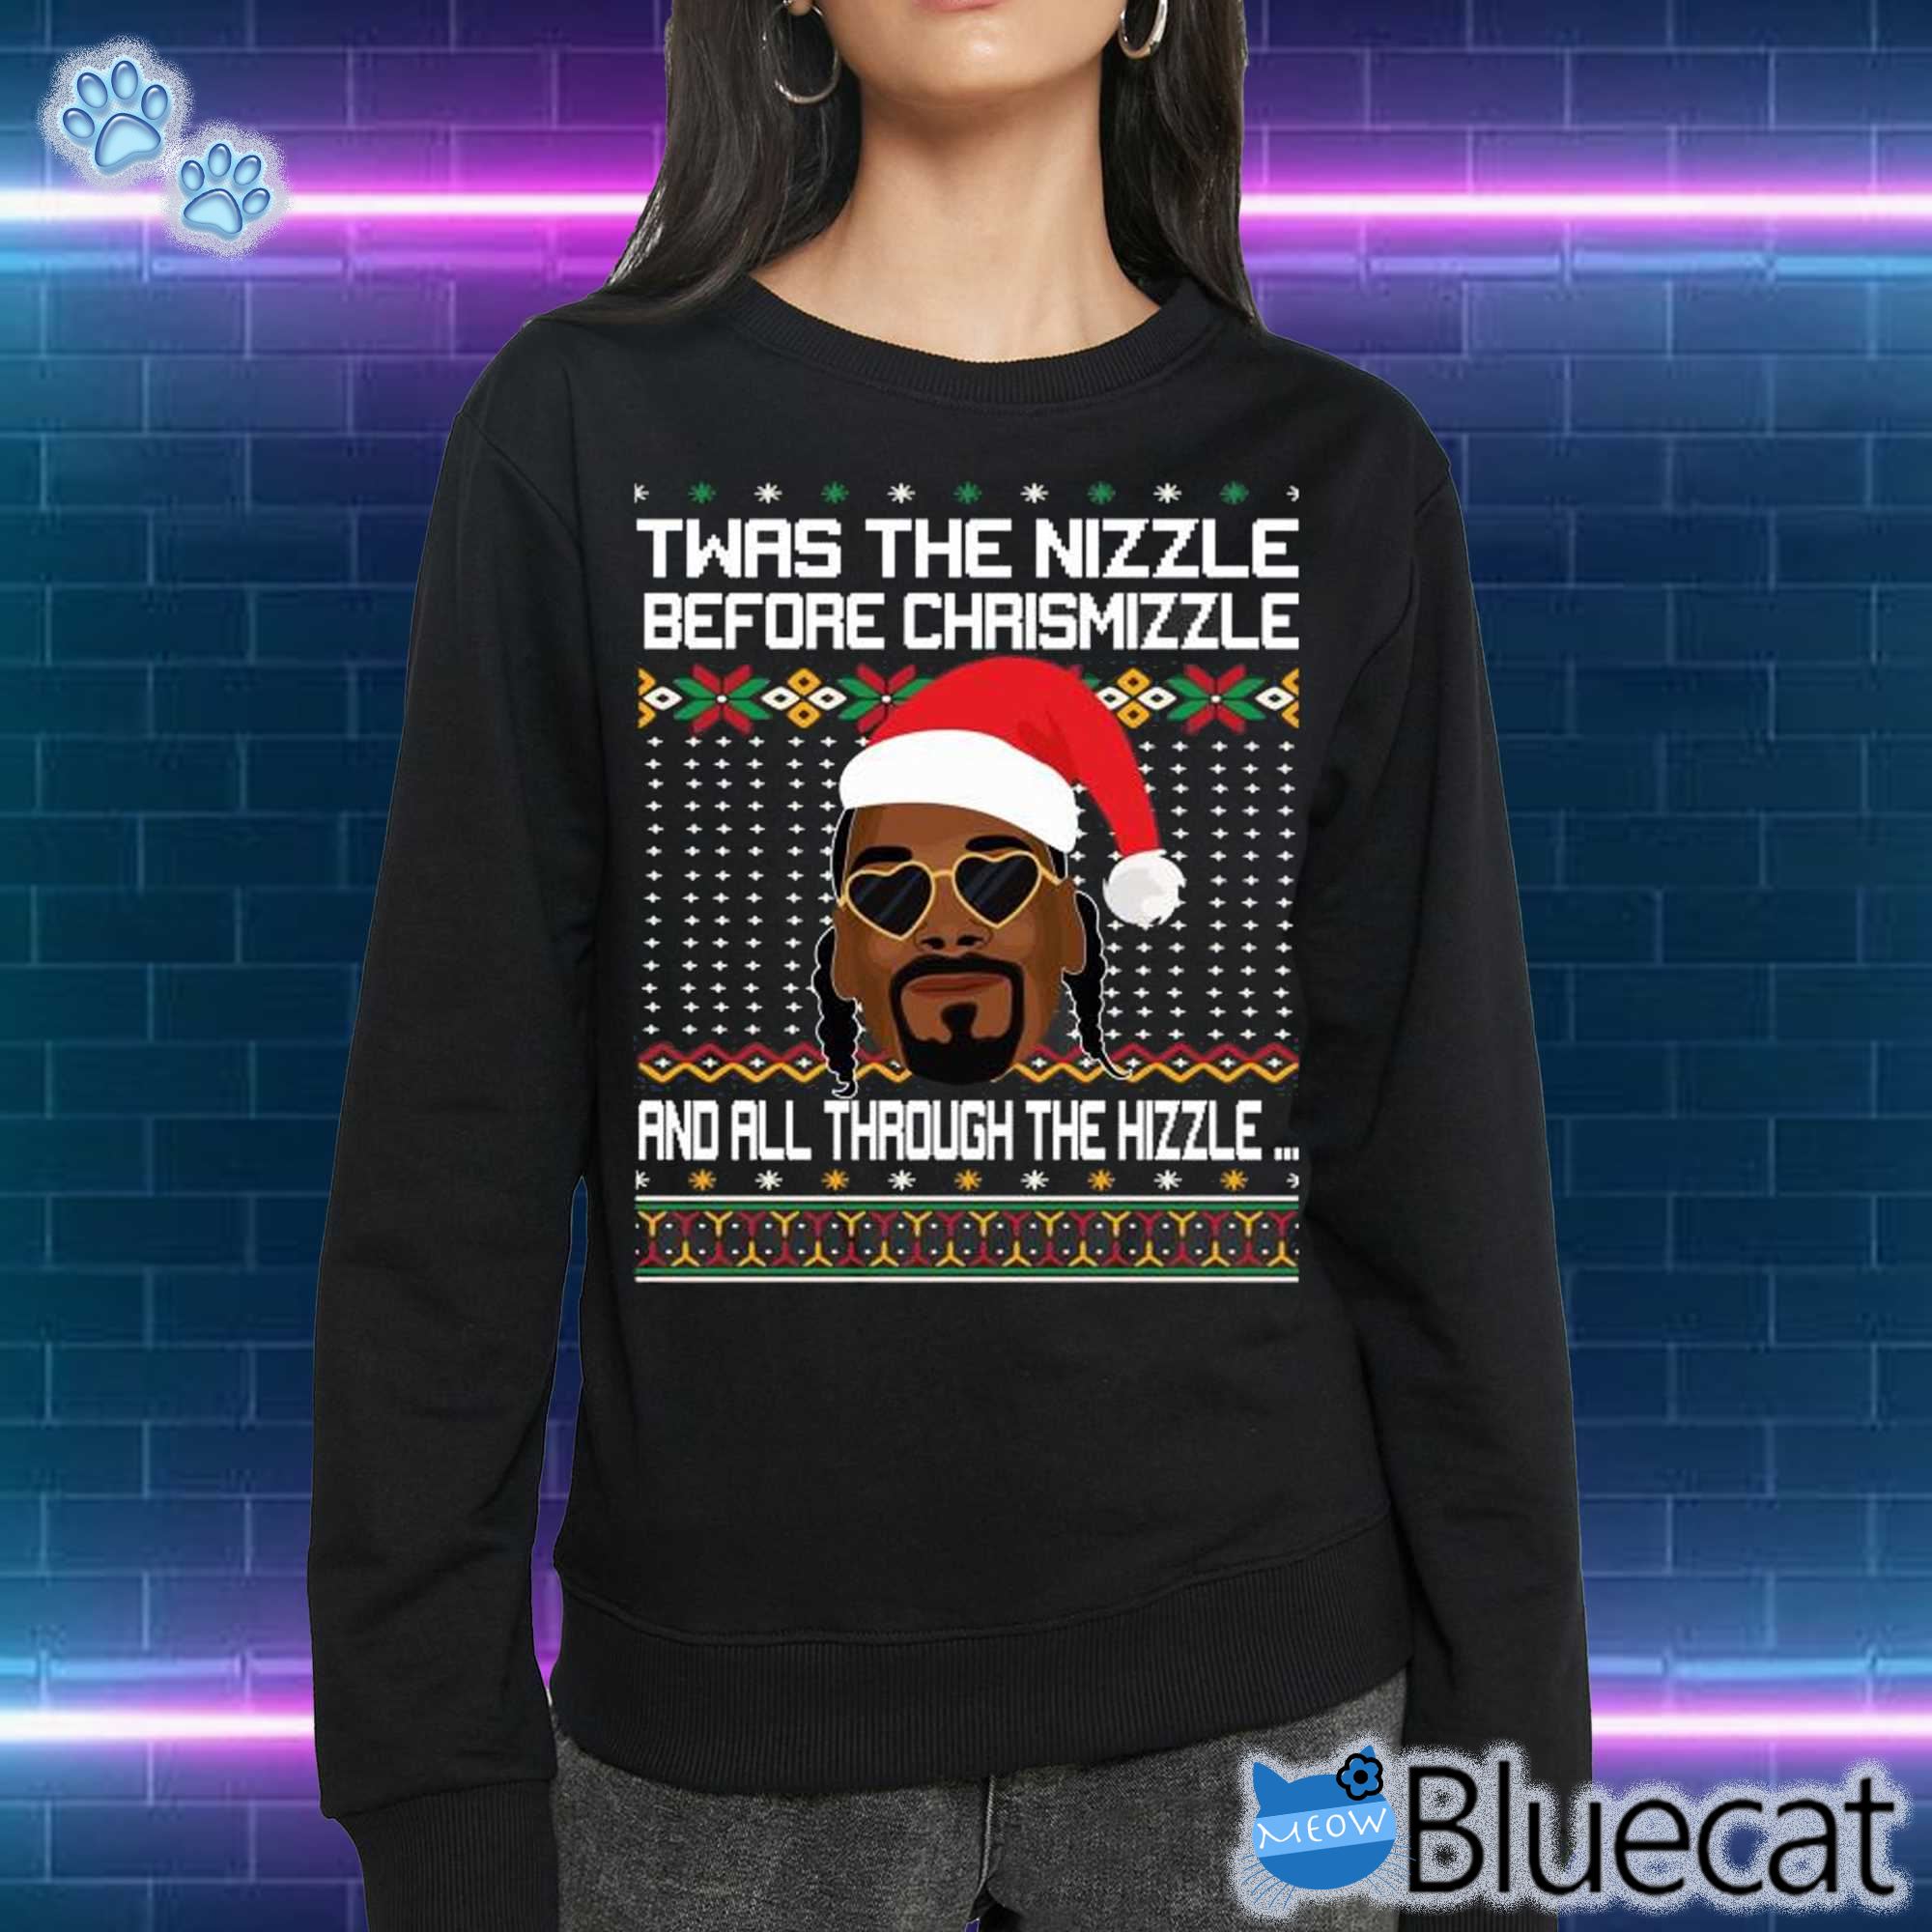 Snoop Dogg Fo Shizzle Dizzle Snoop Dogg Ugly Christmas Sweater Funny Ugly Christmas Sweater 